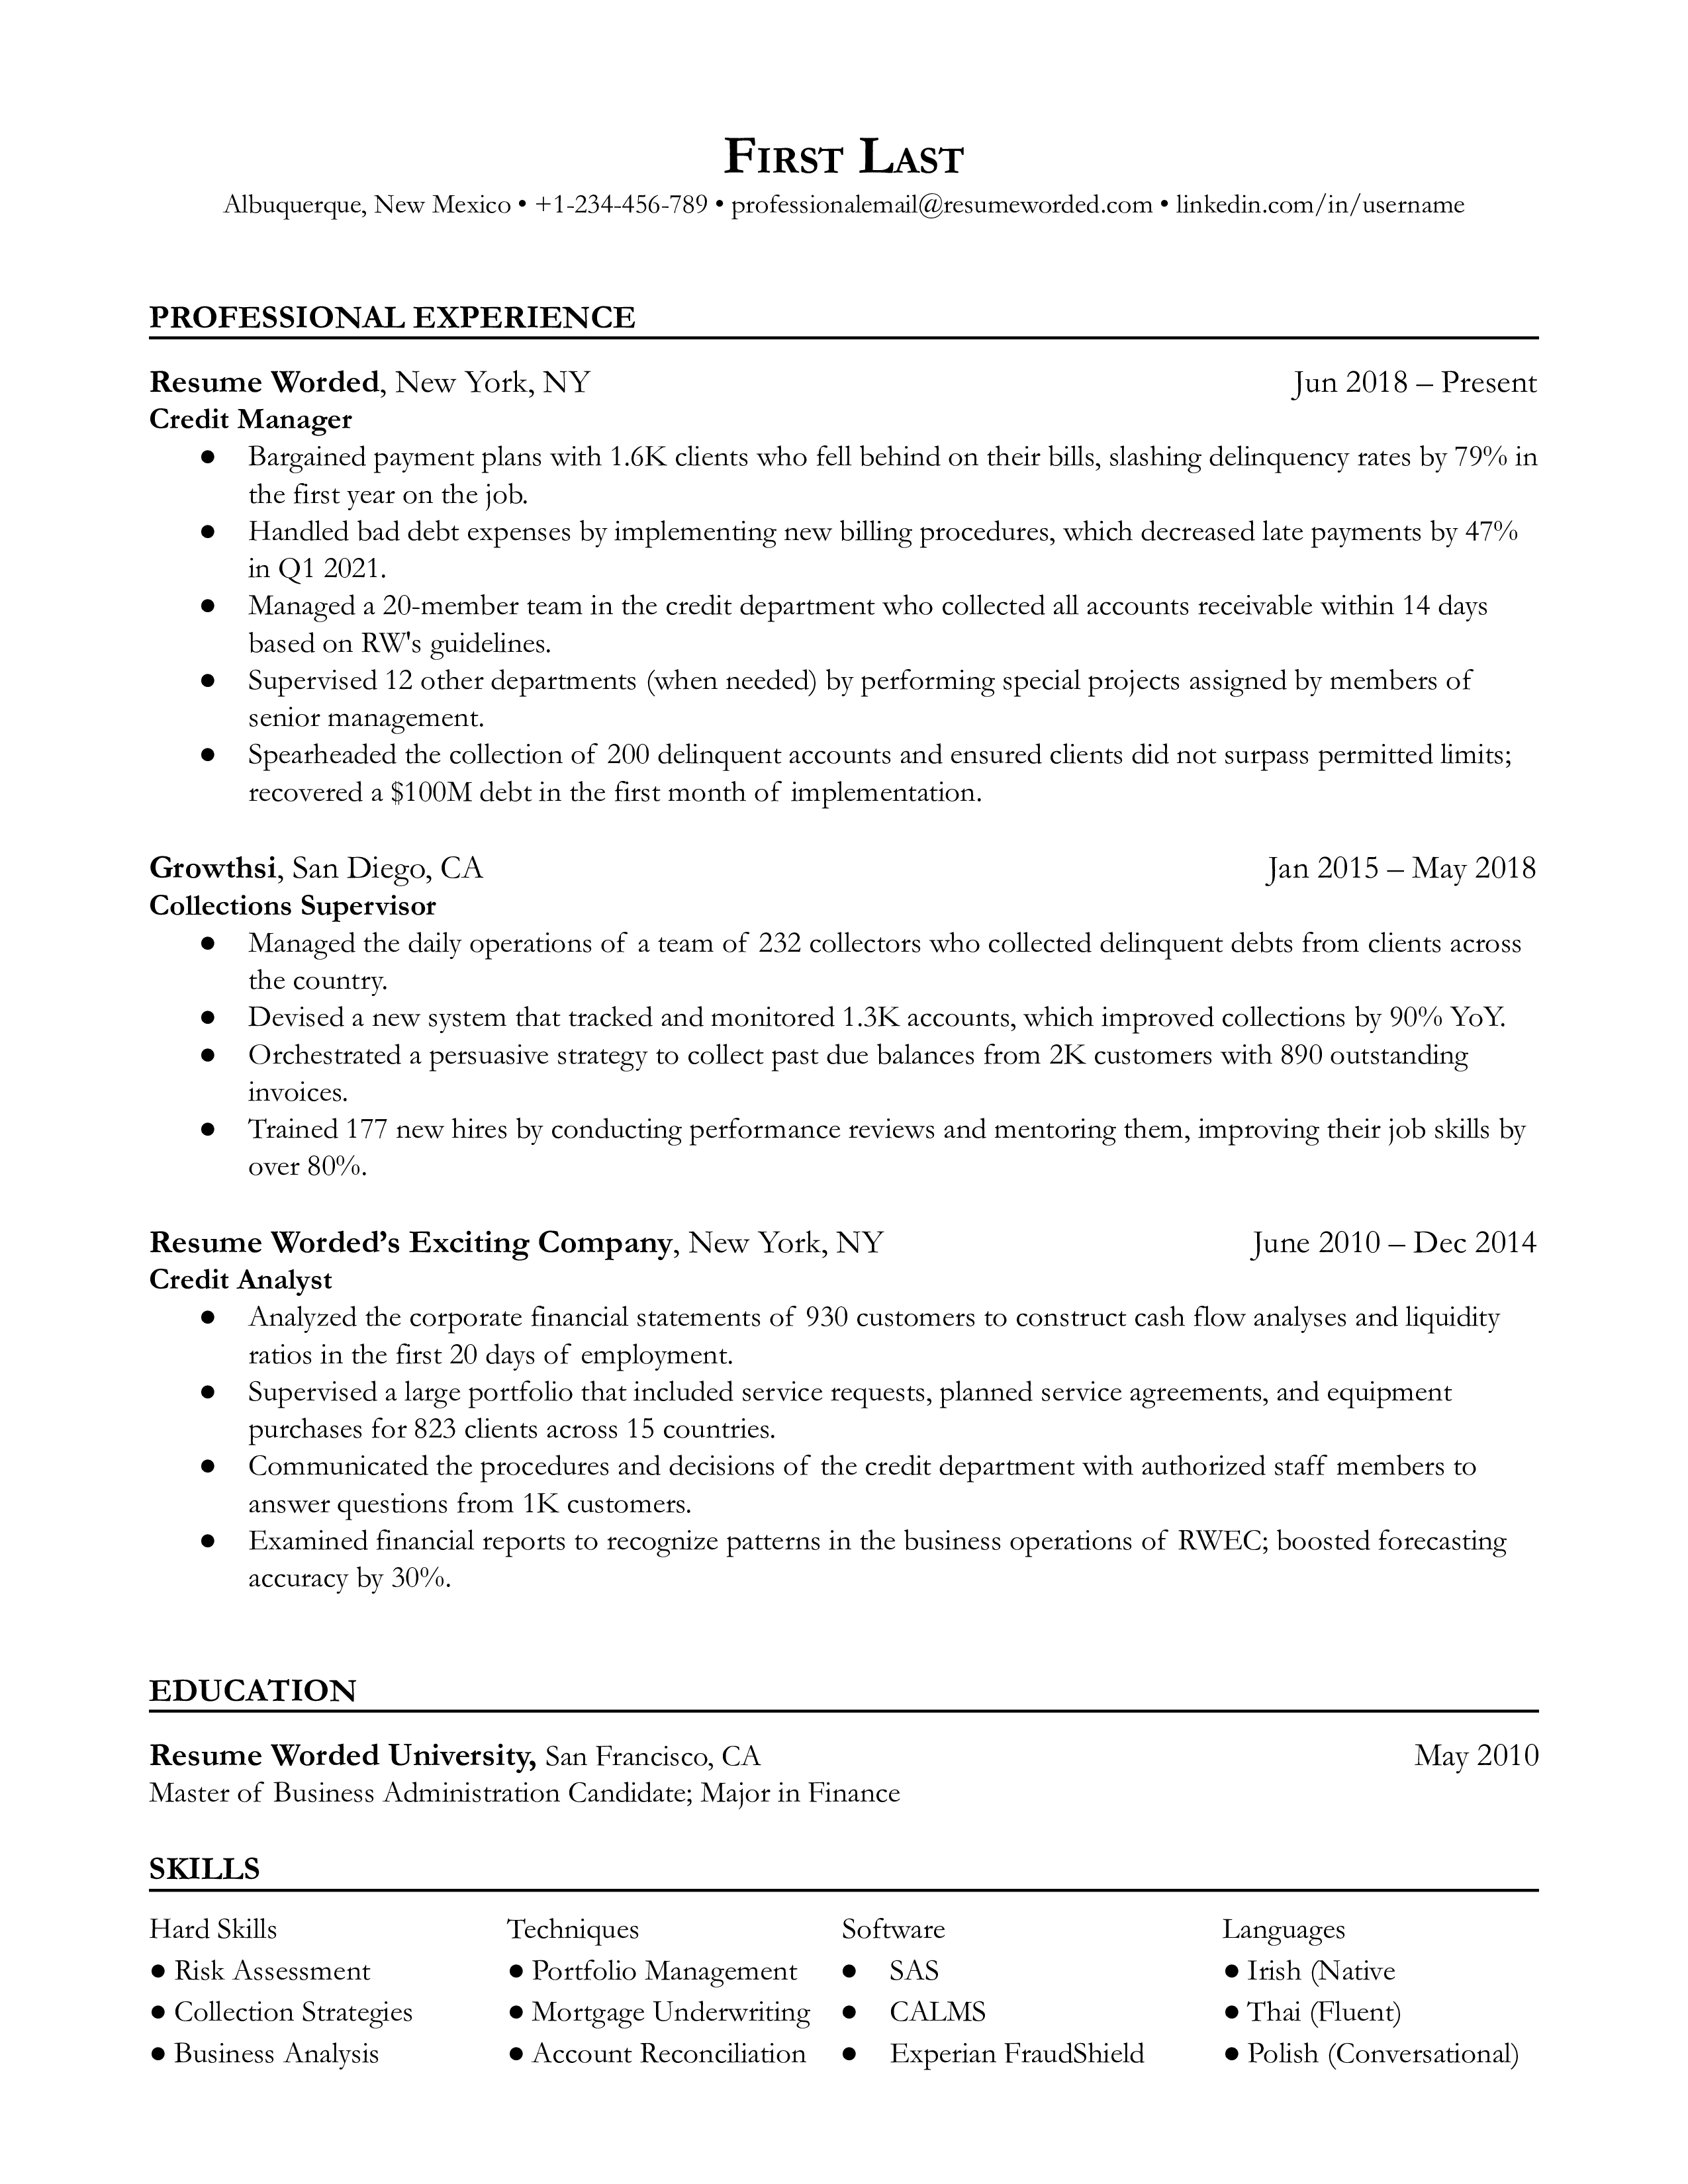 A credit manager resume template that highlights professional experience